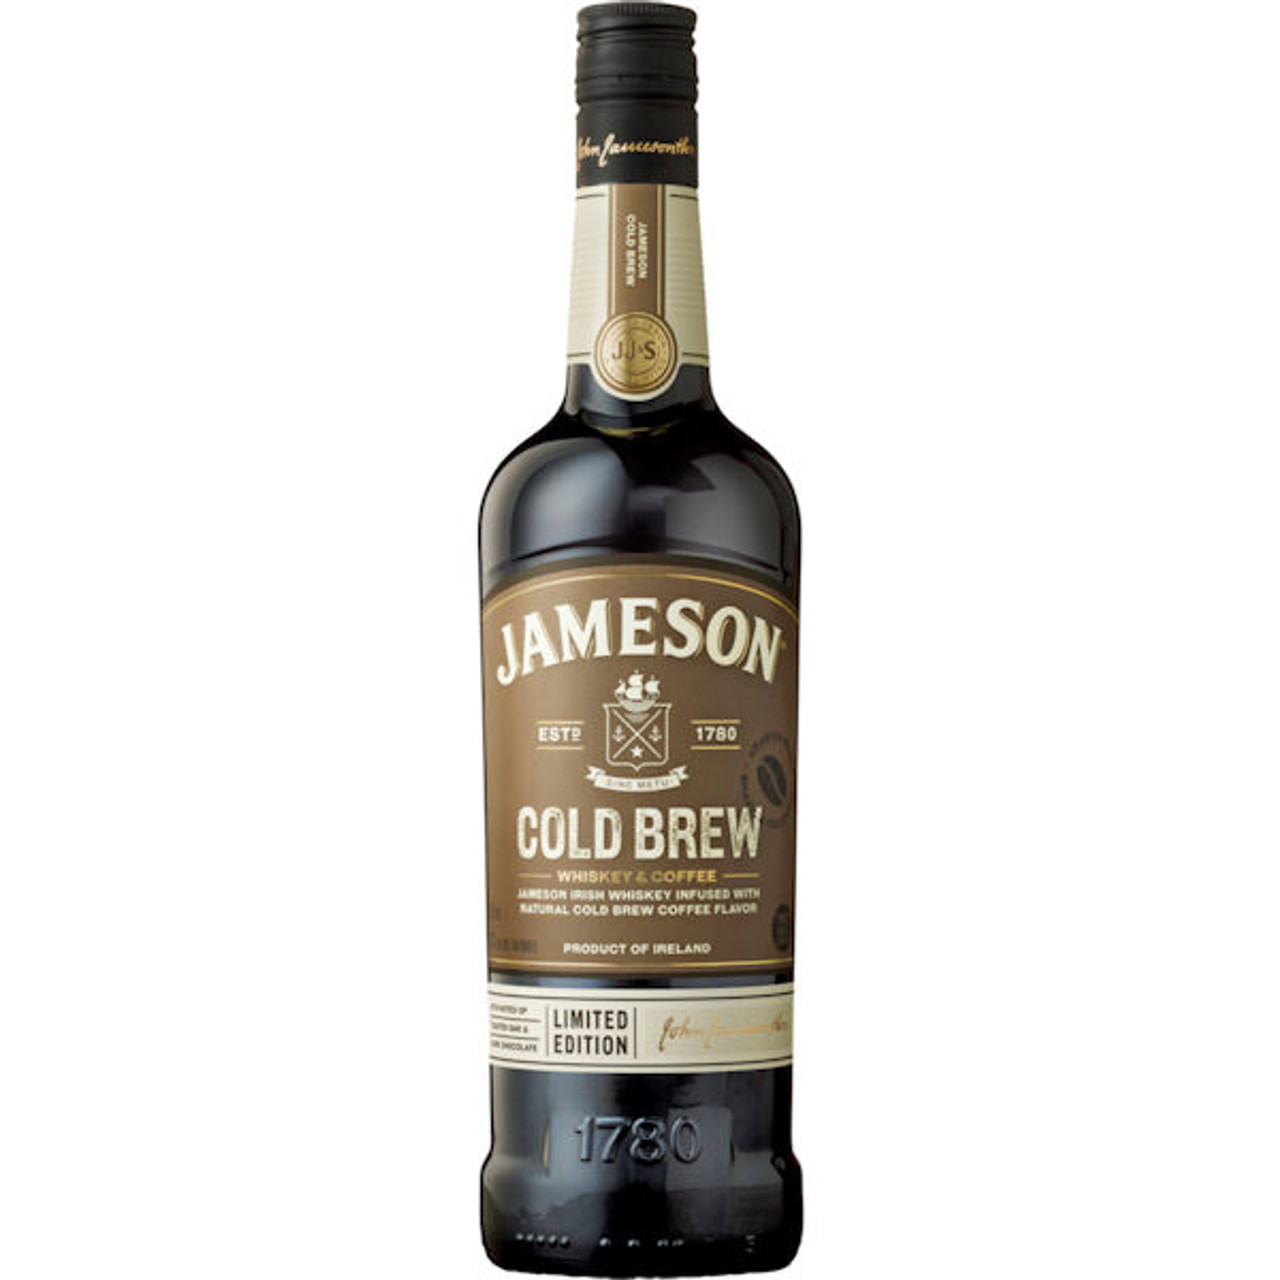 https://cdn11.bigcommerce.com/s-a04d0/images/stencil/1280x1280/products/18603/20375/jameson-cold-brew-coffee-and-irish-whiskey__47573.1665741927.jpg?c=2